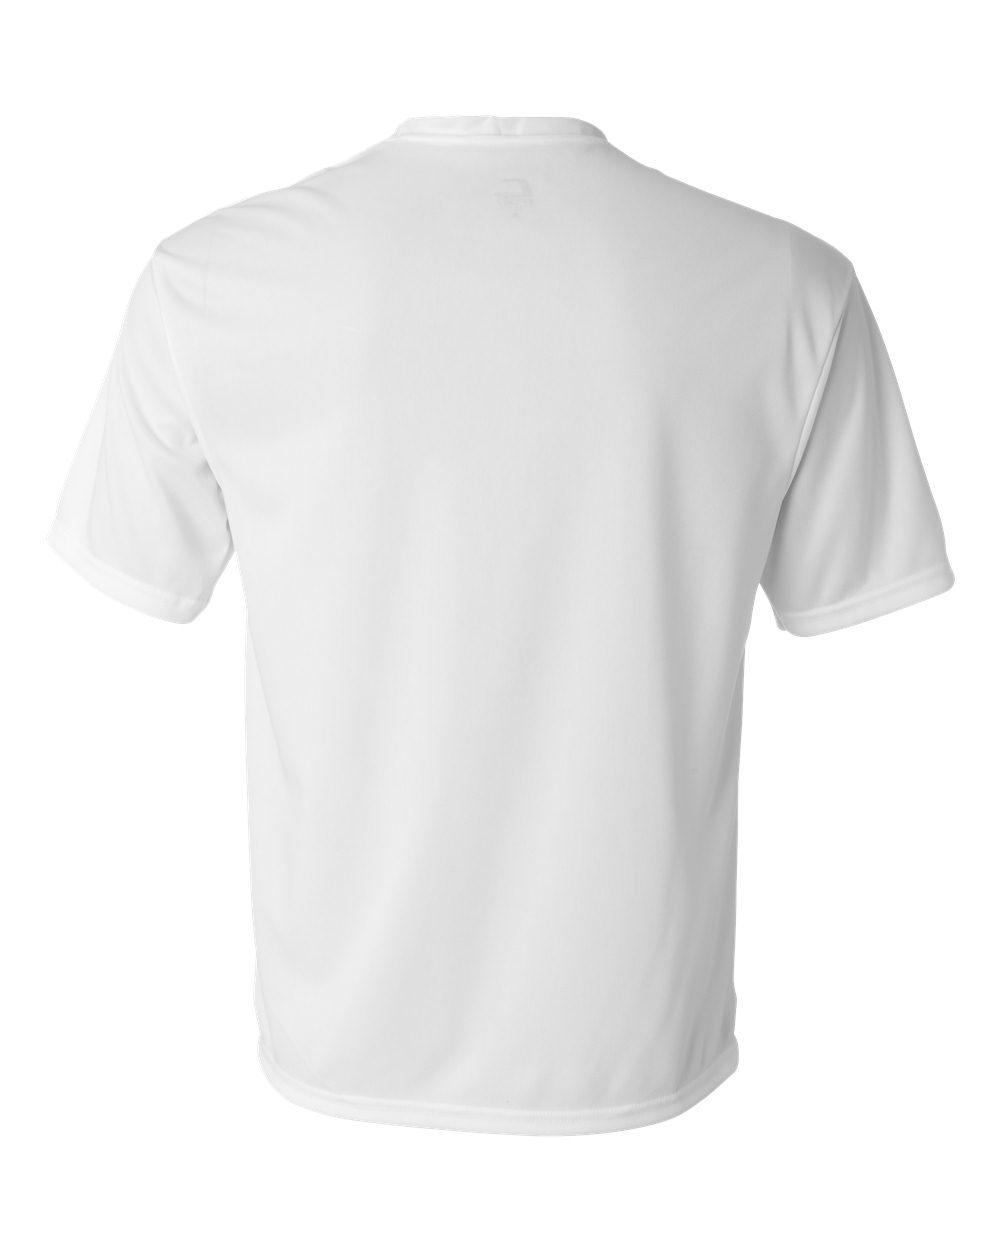 Details about   C2 Sport Performance Dri Fit Short Sleeve Tshirt 5200 Youth XS-XL 